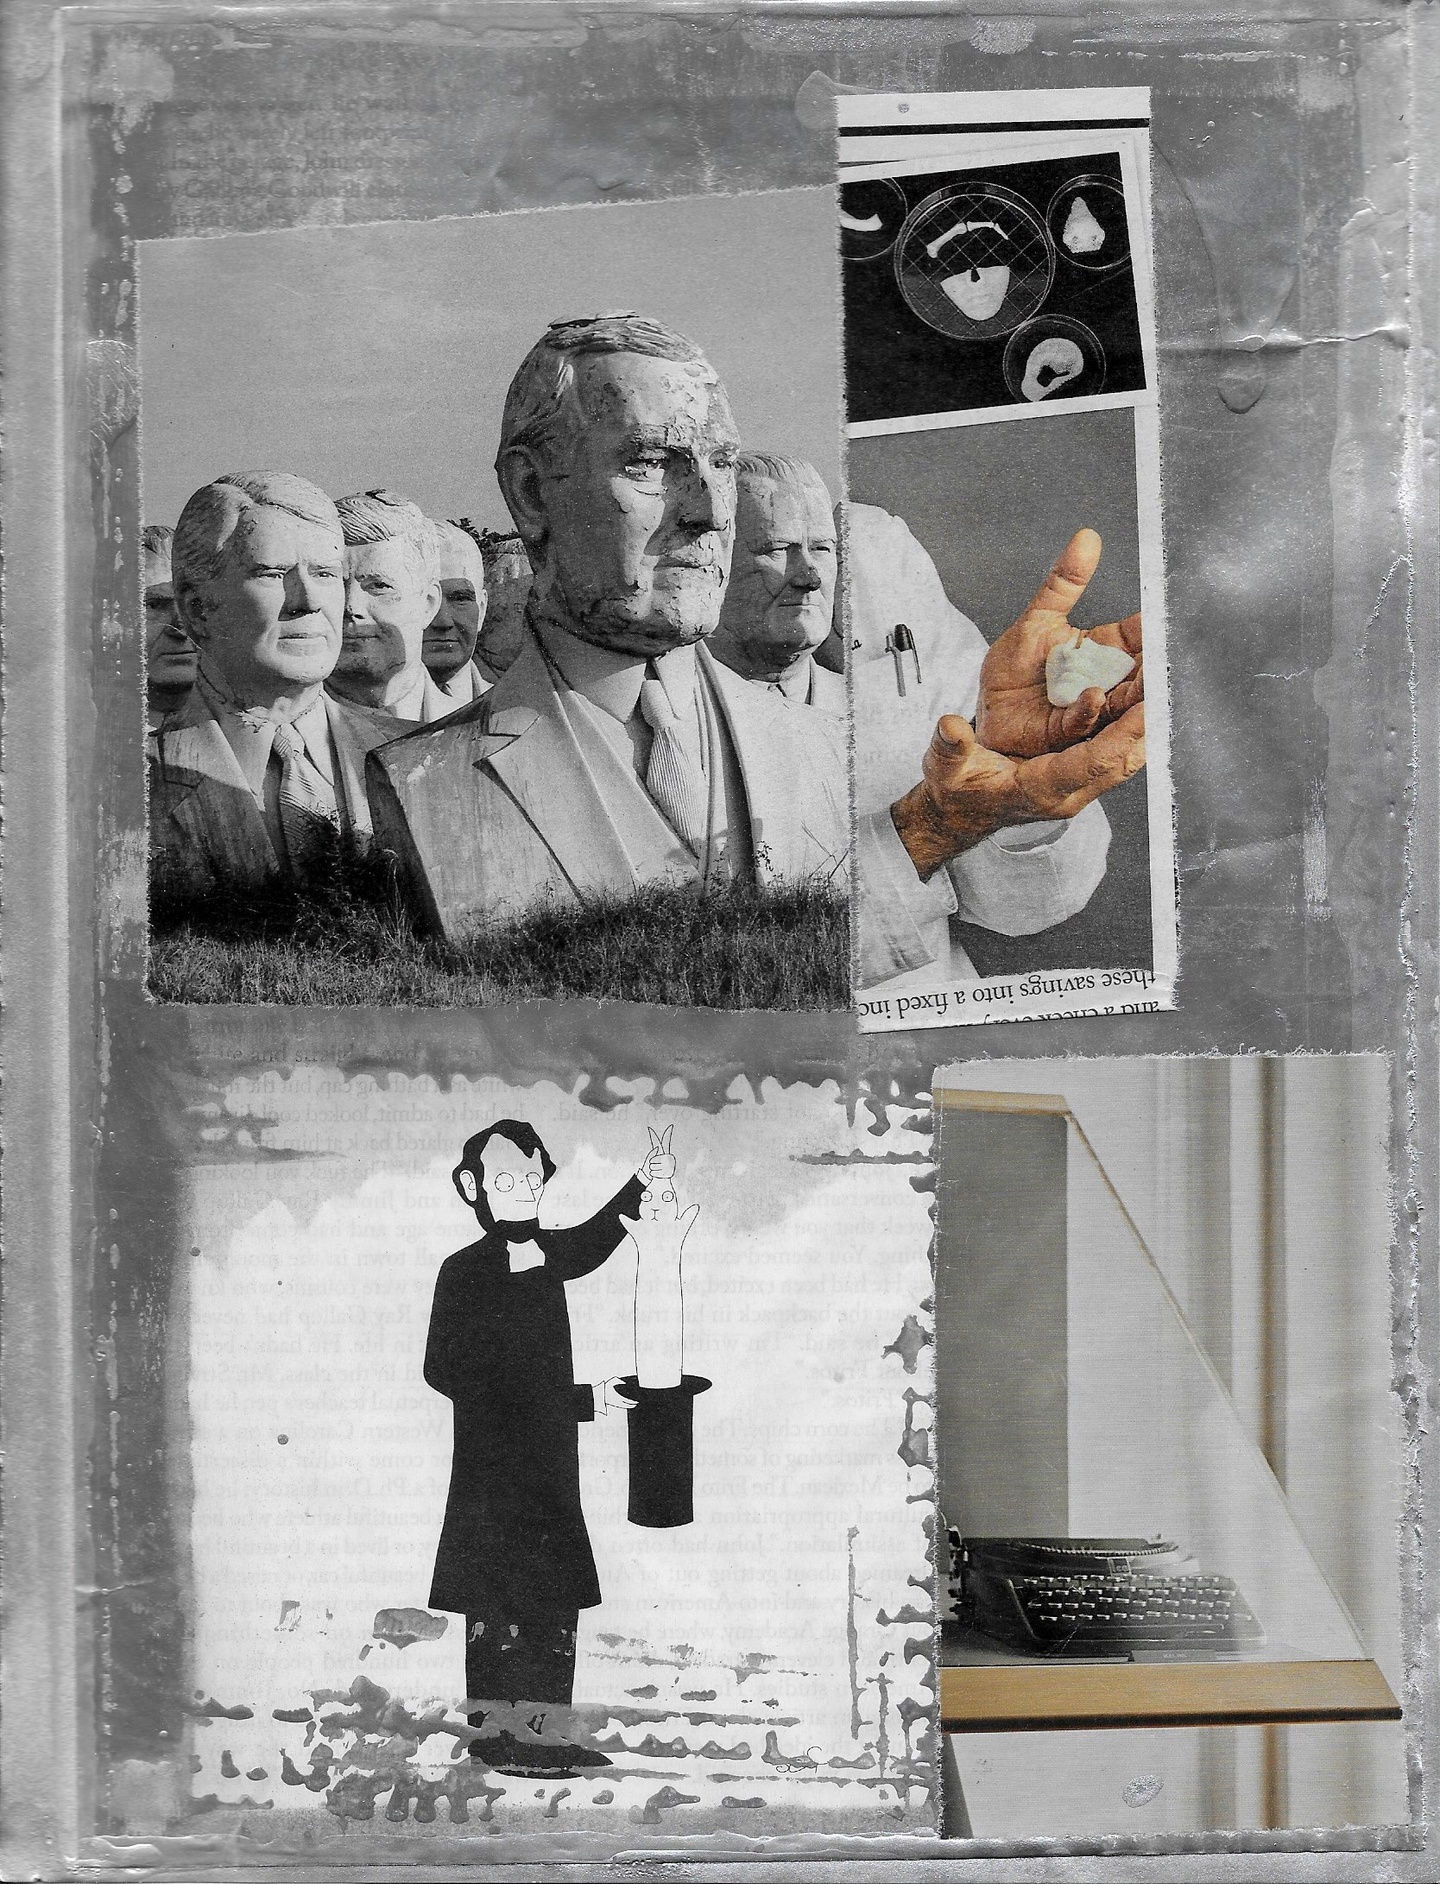 On a textured, gray ground, a collage: massive sculptures — busts — of men in suits, all looking to the right; a scientific/microscopic image of Petri dishes; a person with open hands, holding a fragment of a sculpture; an illustration of Abraham Lincoln pulling a rabbit out of his topcoat; a photograph of a typewriter under slanted glass. The first three are positioned together to the top and the latter two tiled side by side, so that the hands cradling the sculpture fragment appear to protrude from the mass of large-scale busts of the men.